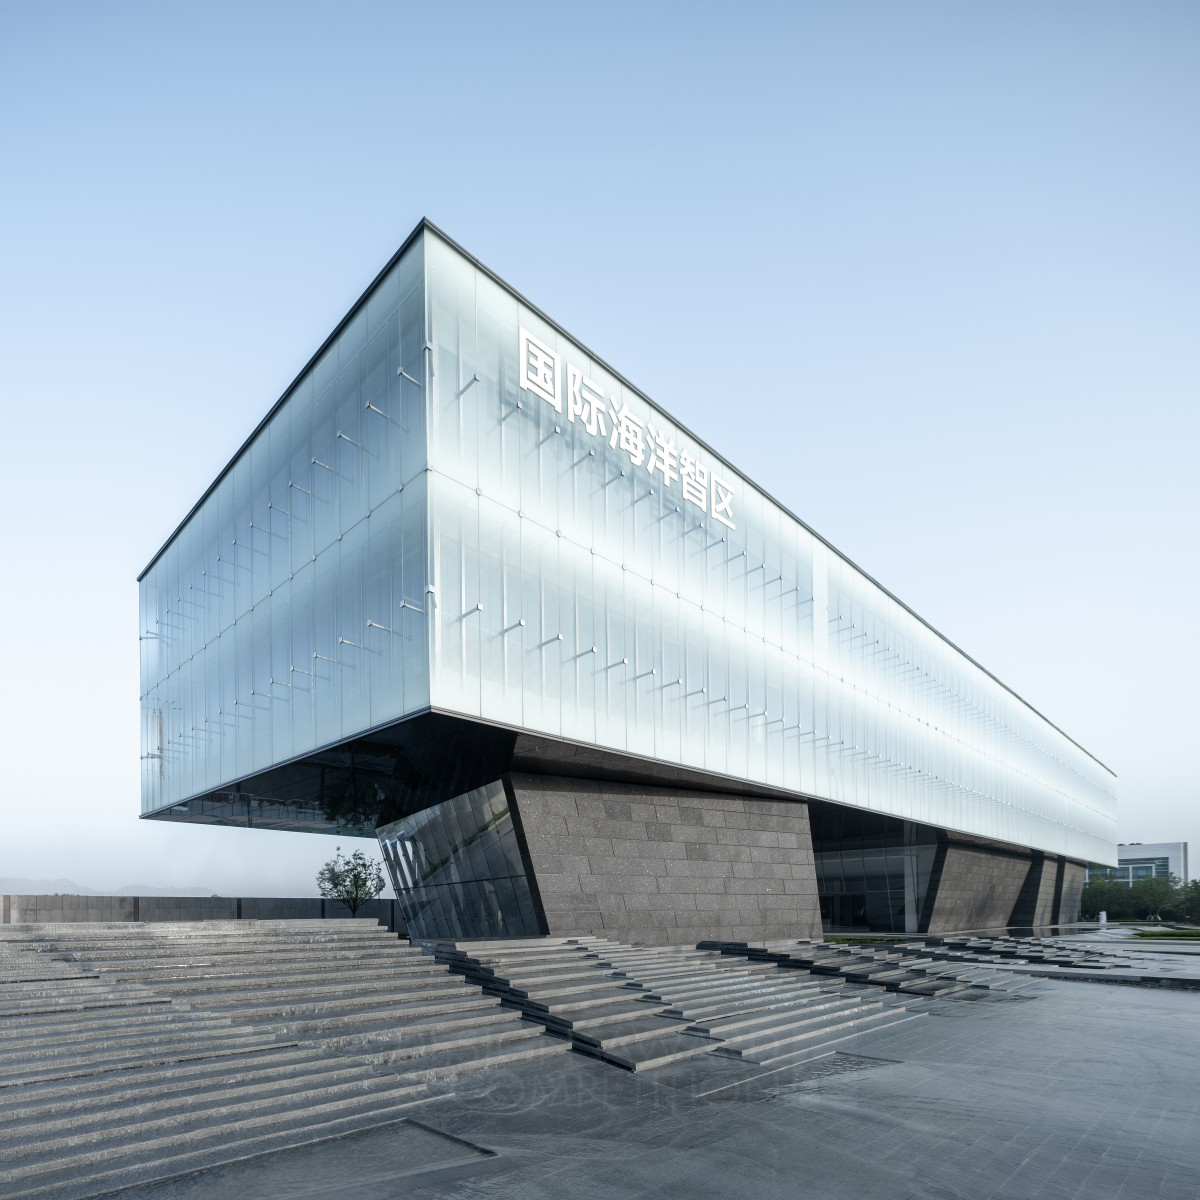 Qingdao Marine Park Exhibition Center Building by Cheng Xiao